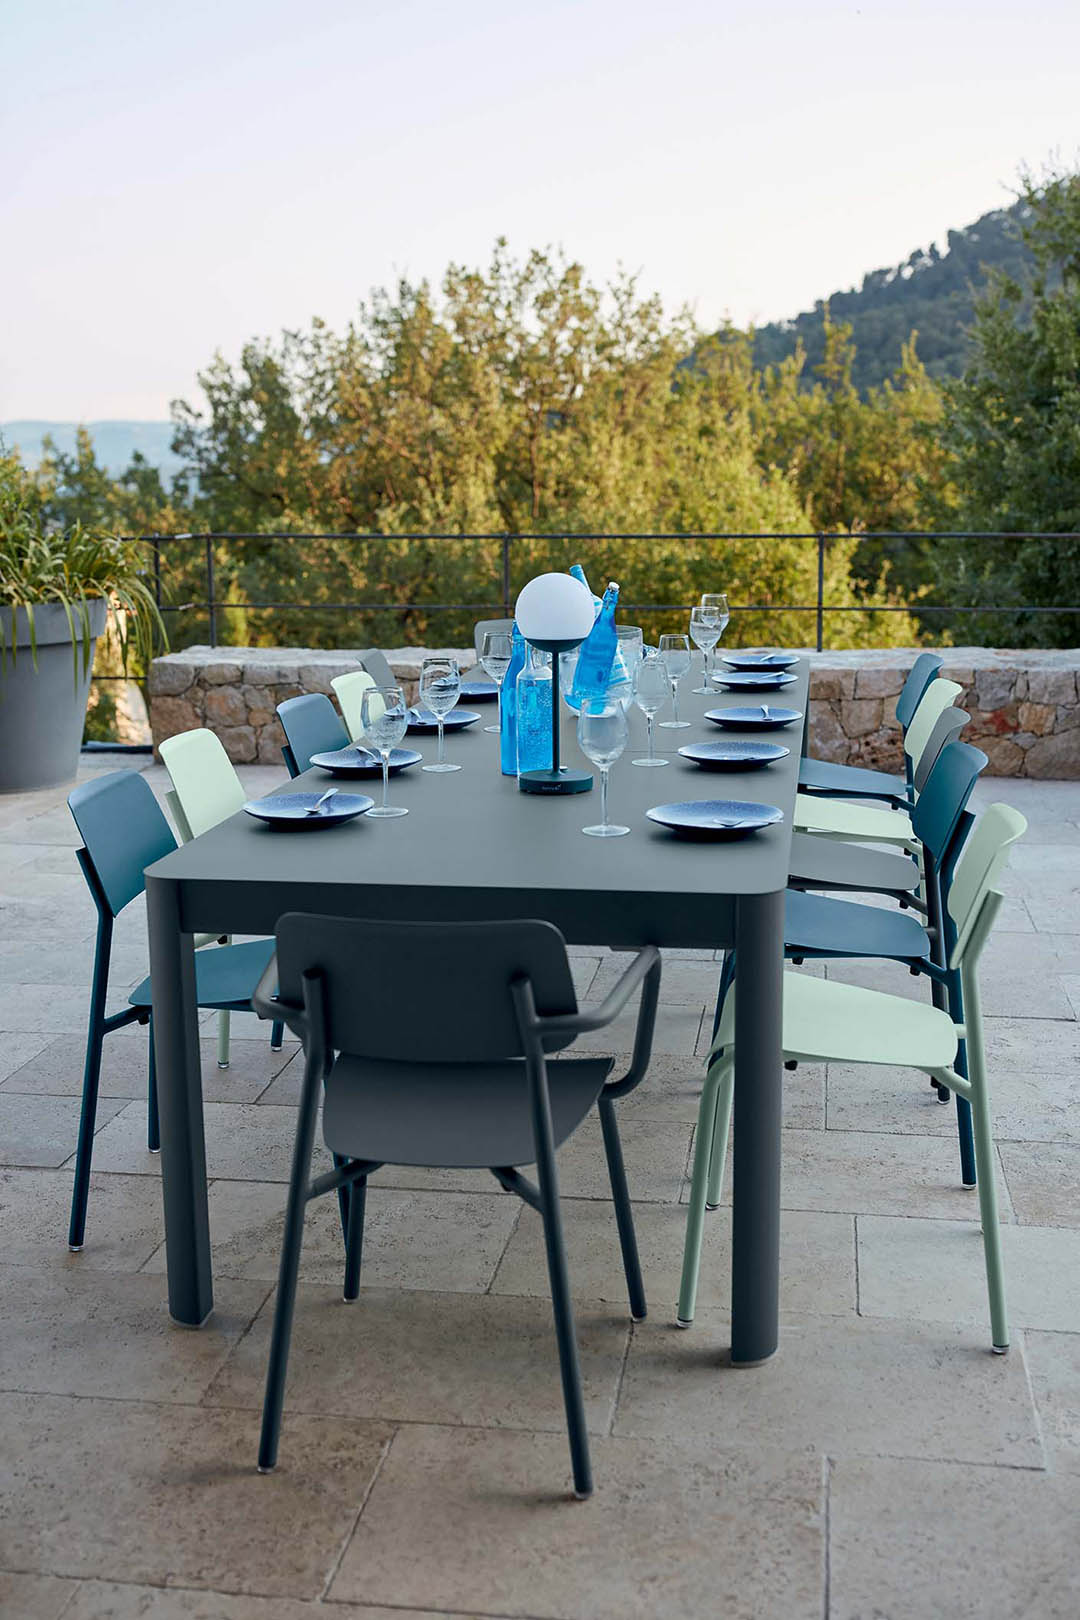 table de jardin, table metal, table 12 personnes, table de jardin a rallonge, table allonge, fermob, garden table, metal table, table for 12 people, garden table with extension, extension table